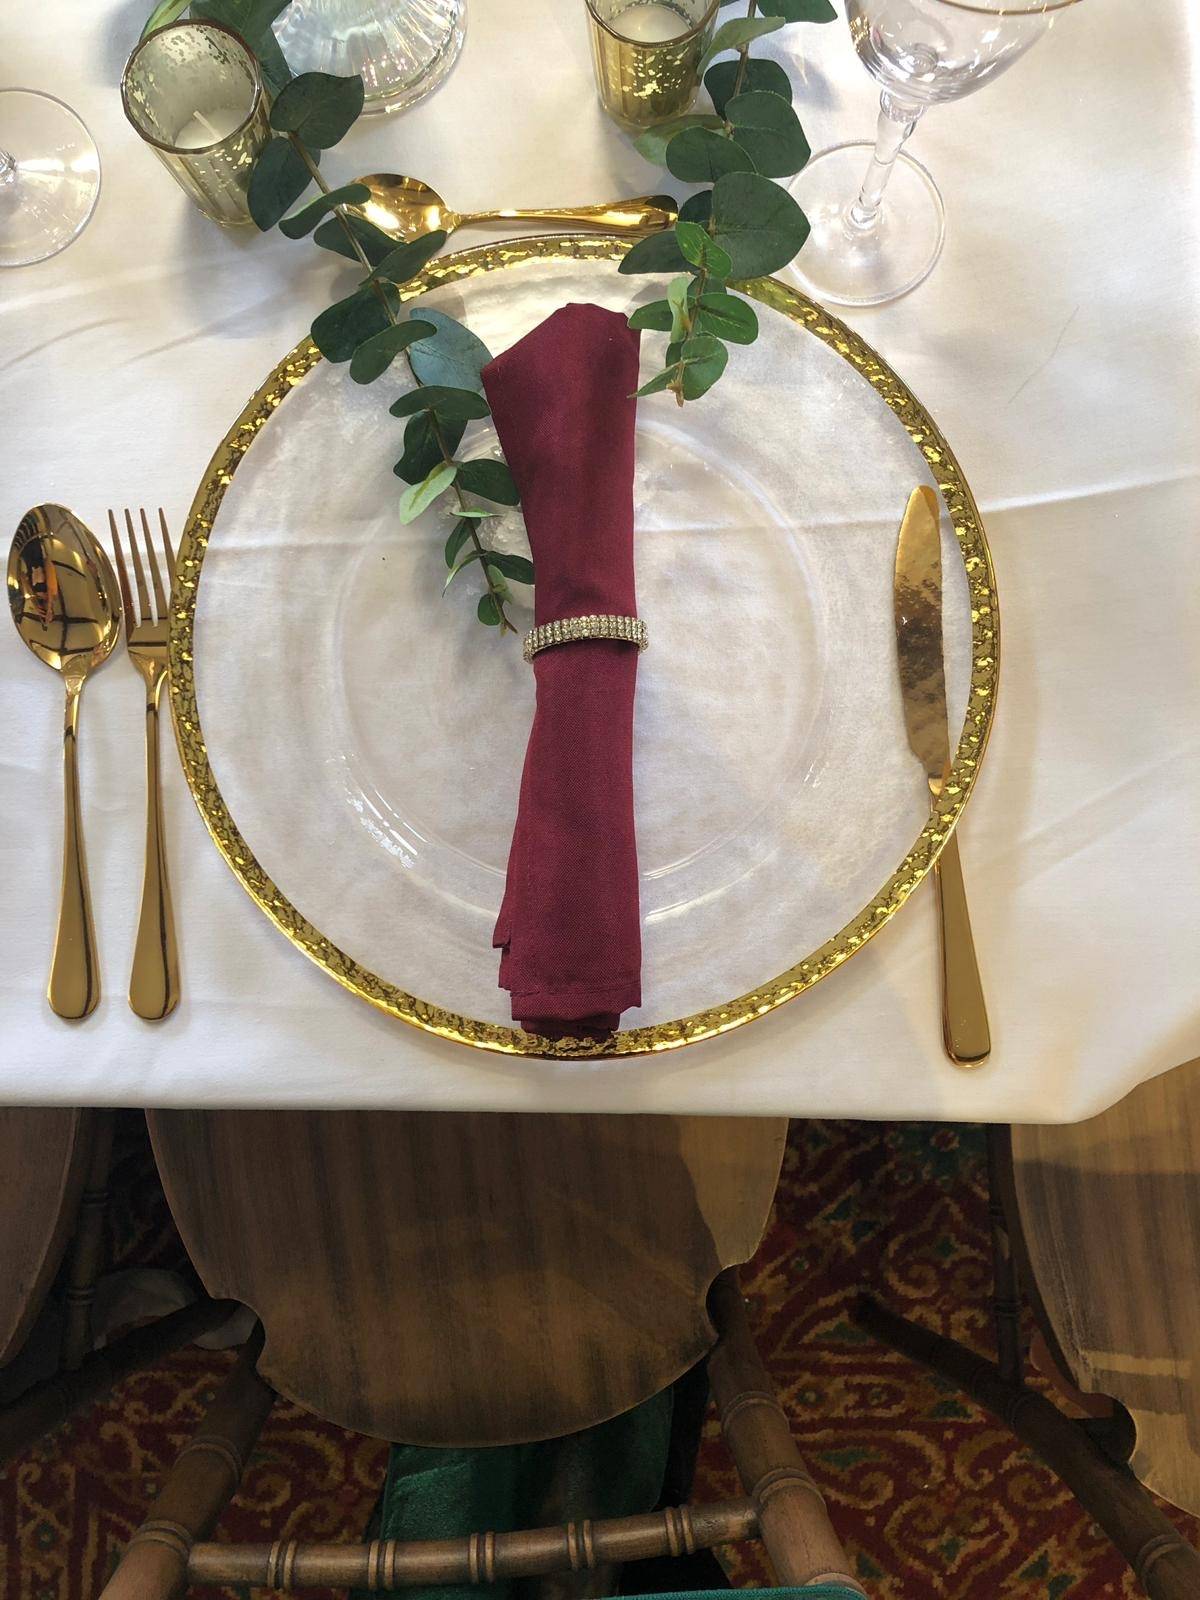 a place setting with a napkin, fork, and knife.